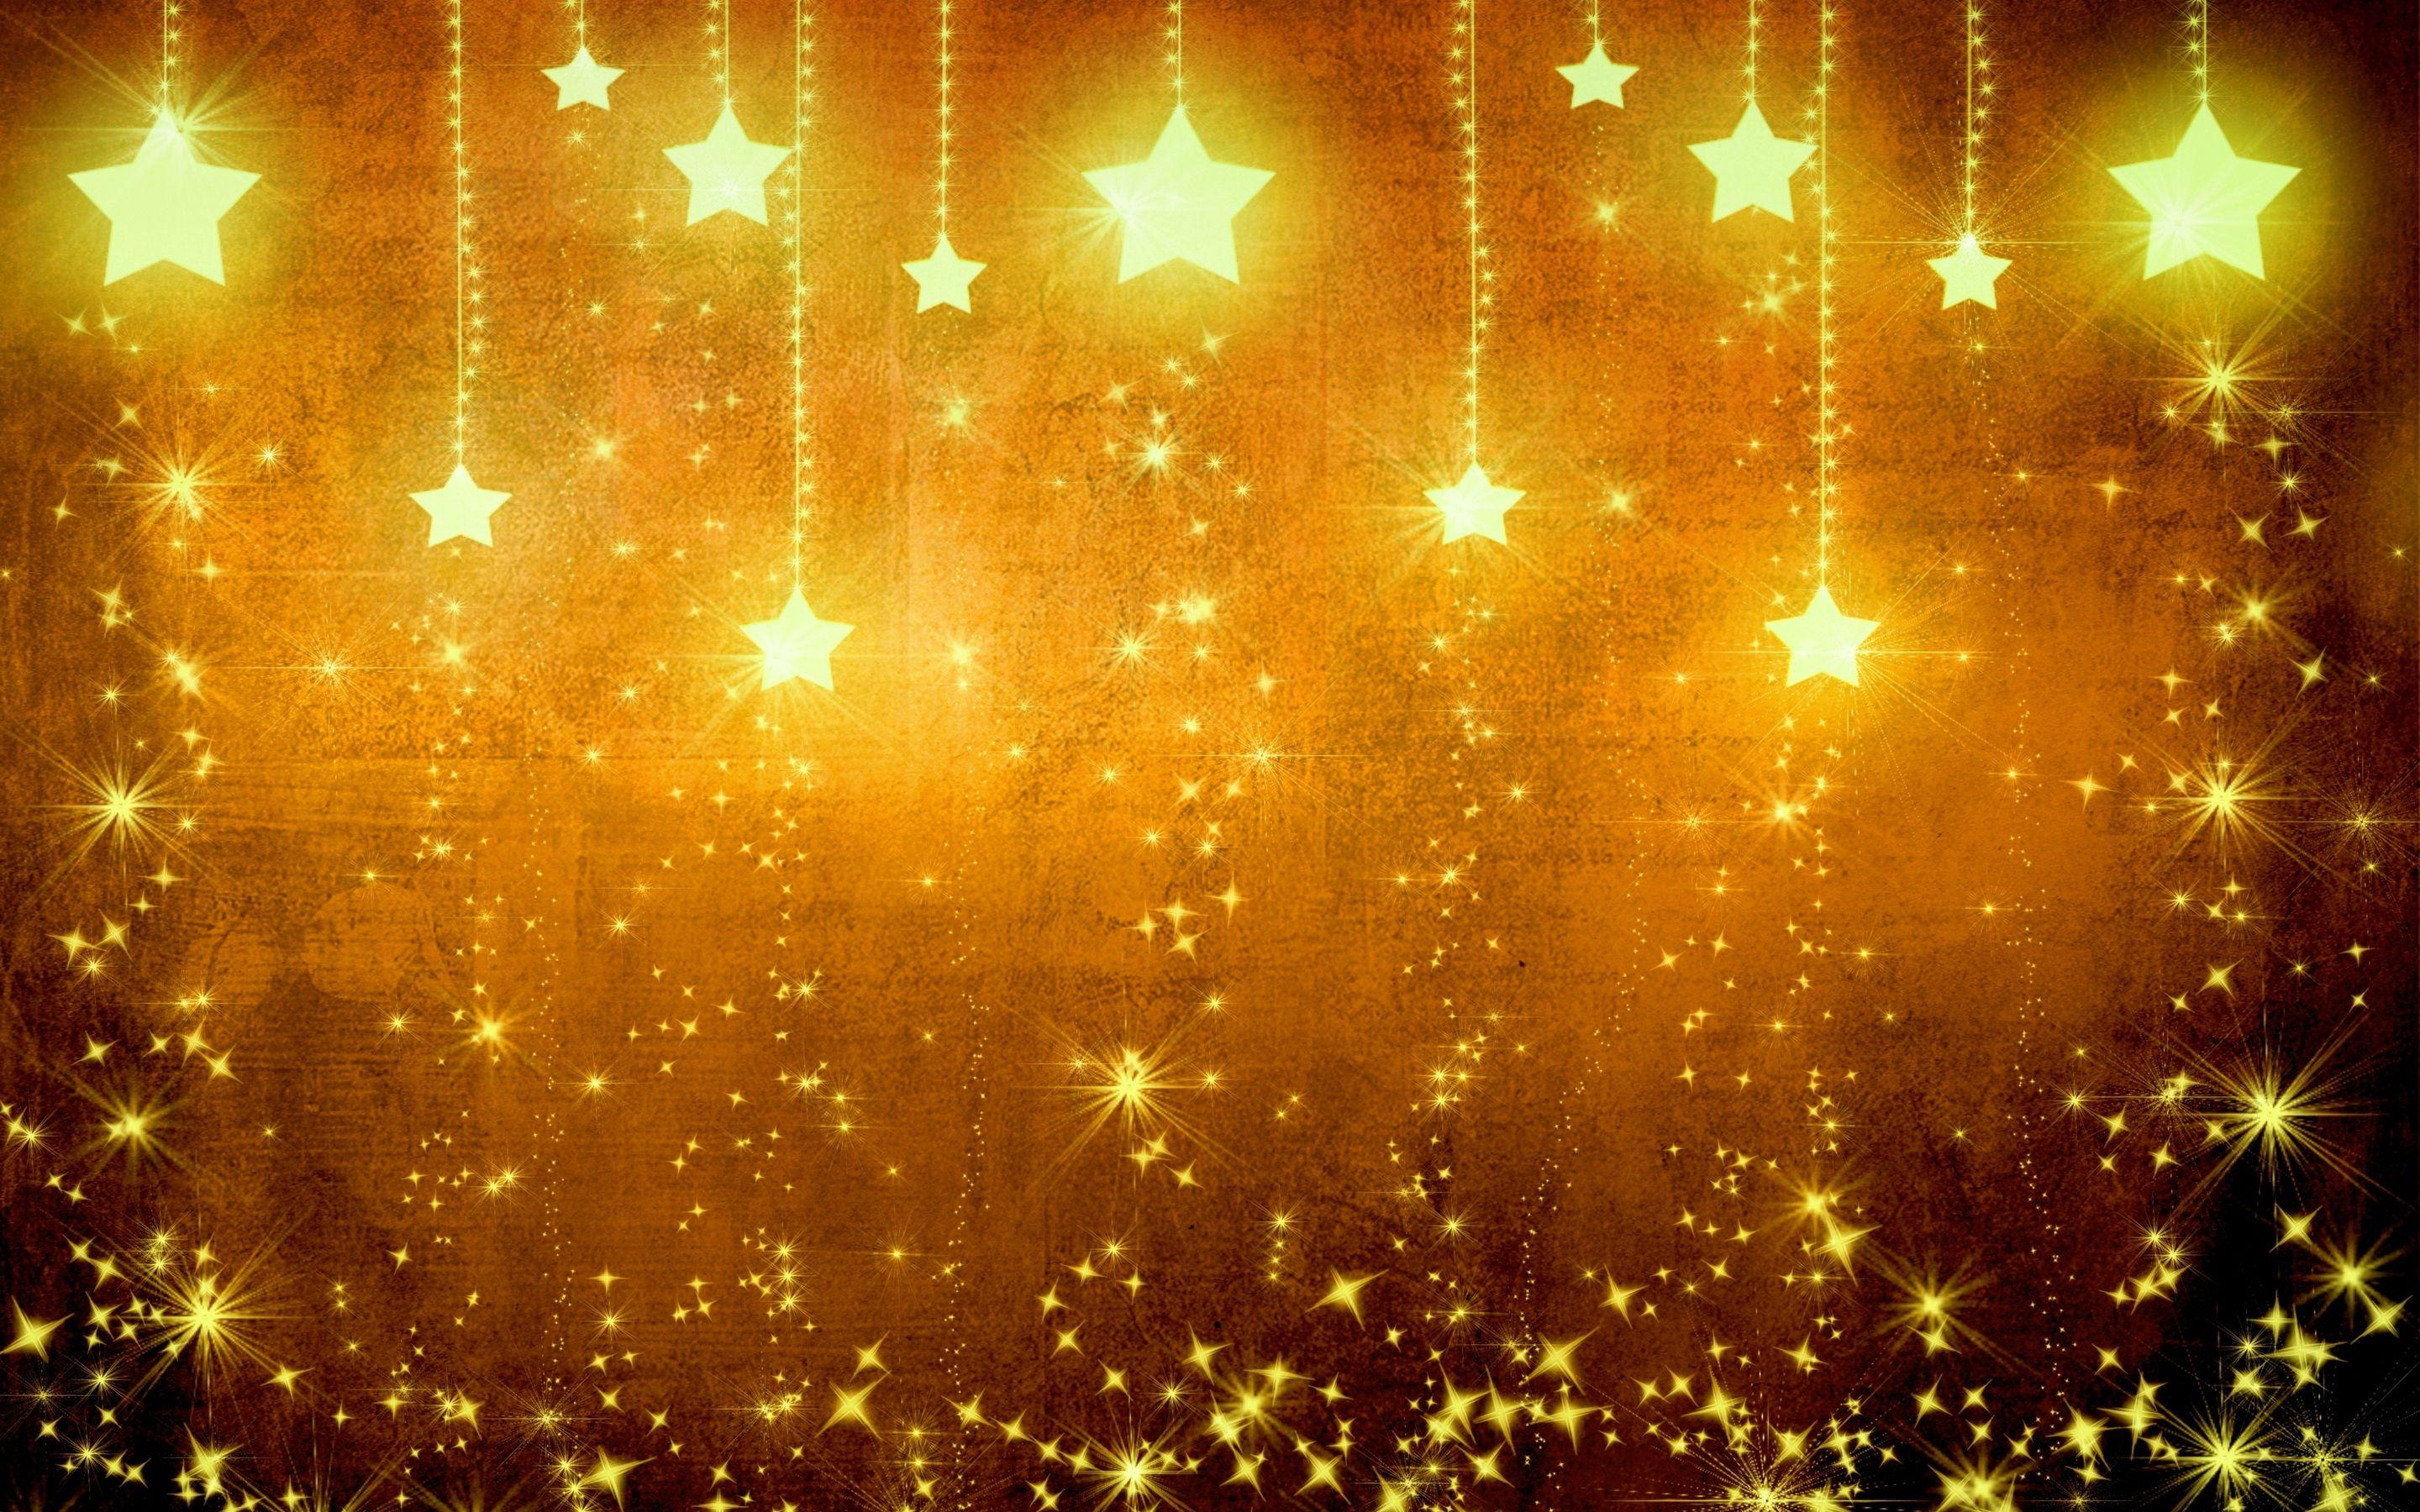 Holiday Christmas Wallpaper. Background and wallpaper